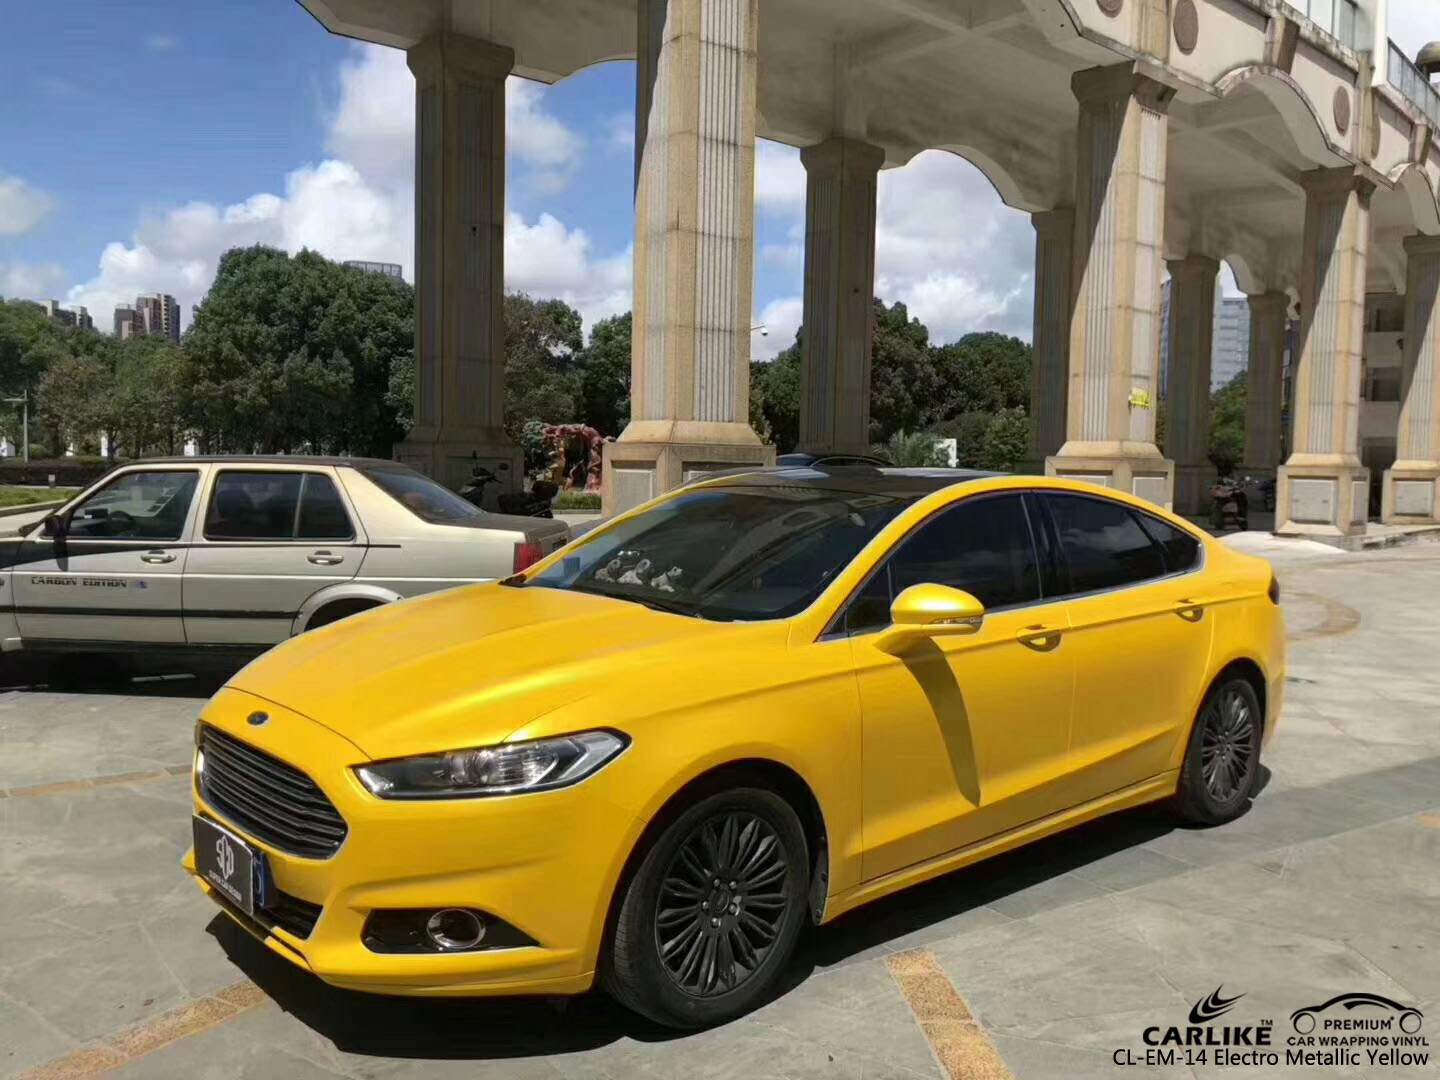 CARLIKE CL-EM-14 ELECTRO METALLIC YELLOW VINYL FOR FORD